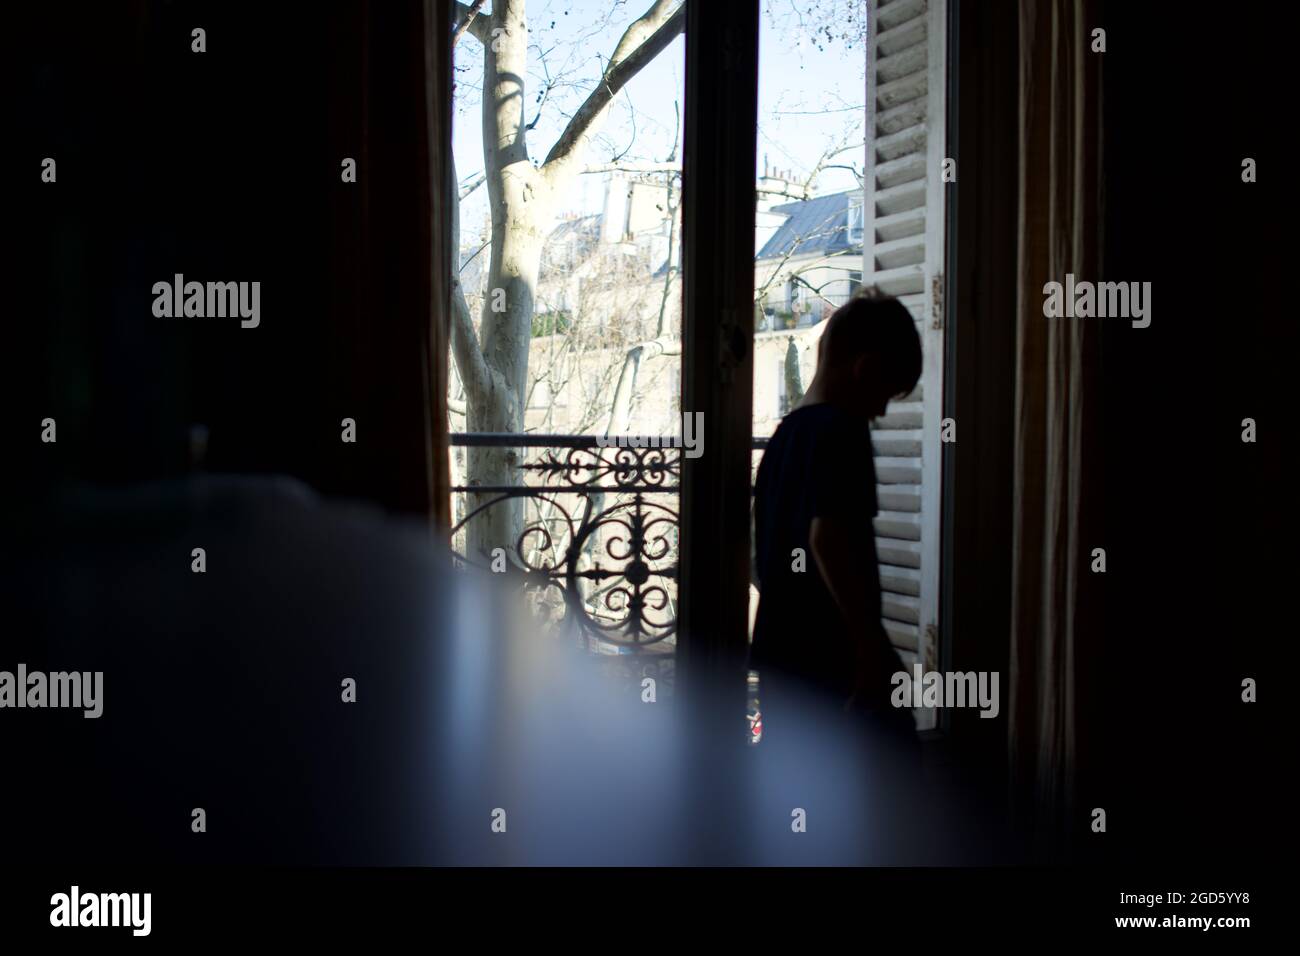 Vulnerable, sad, depressed young child, silhouetted by window - townhouse interior Stock Photo